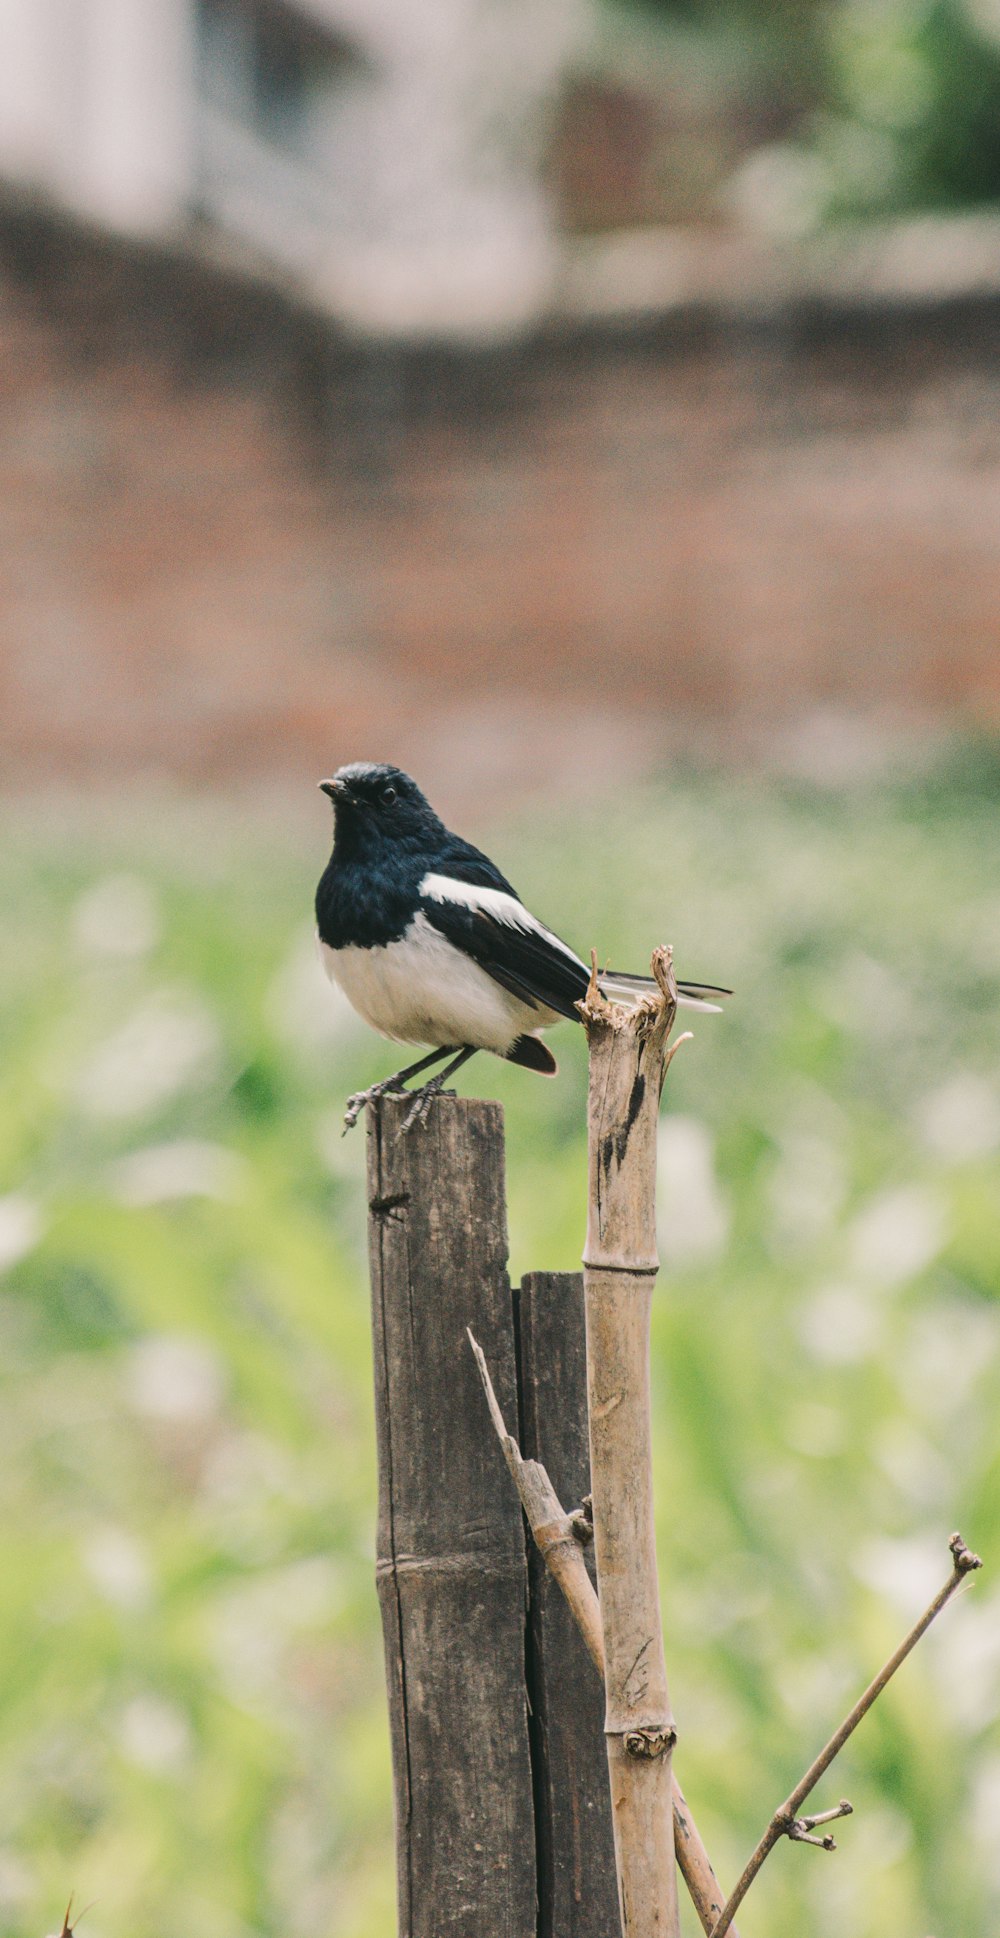 black and white bird on brown wooden stick during daytime